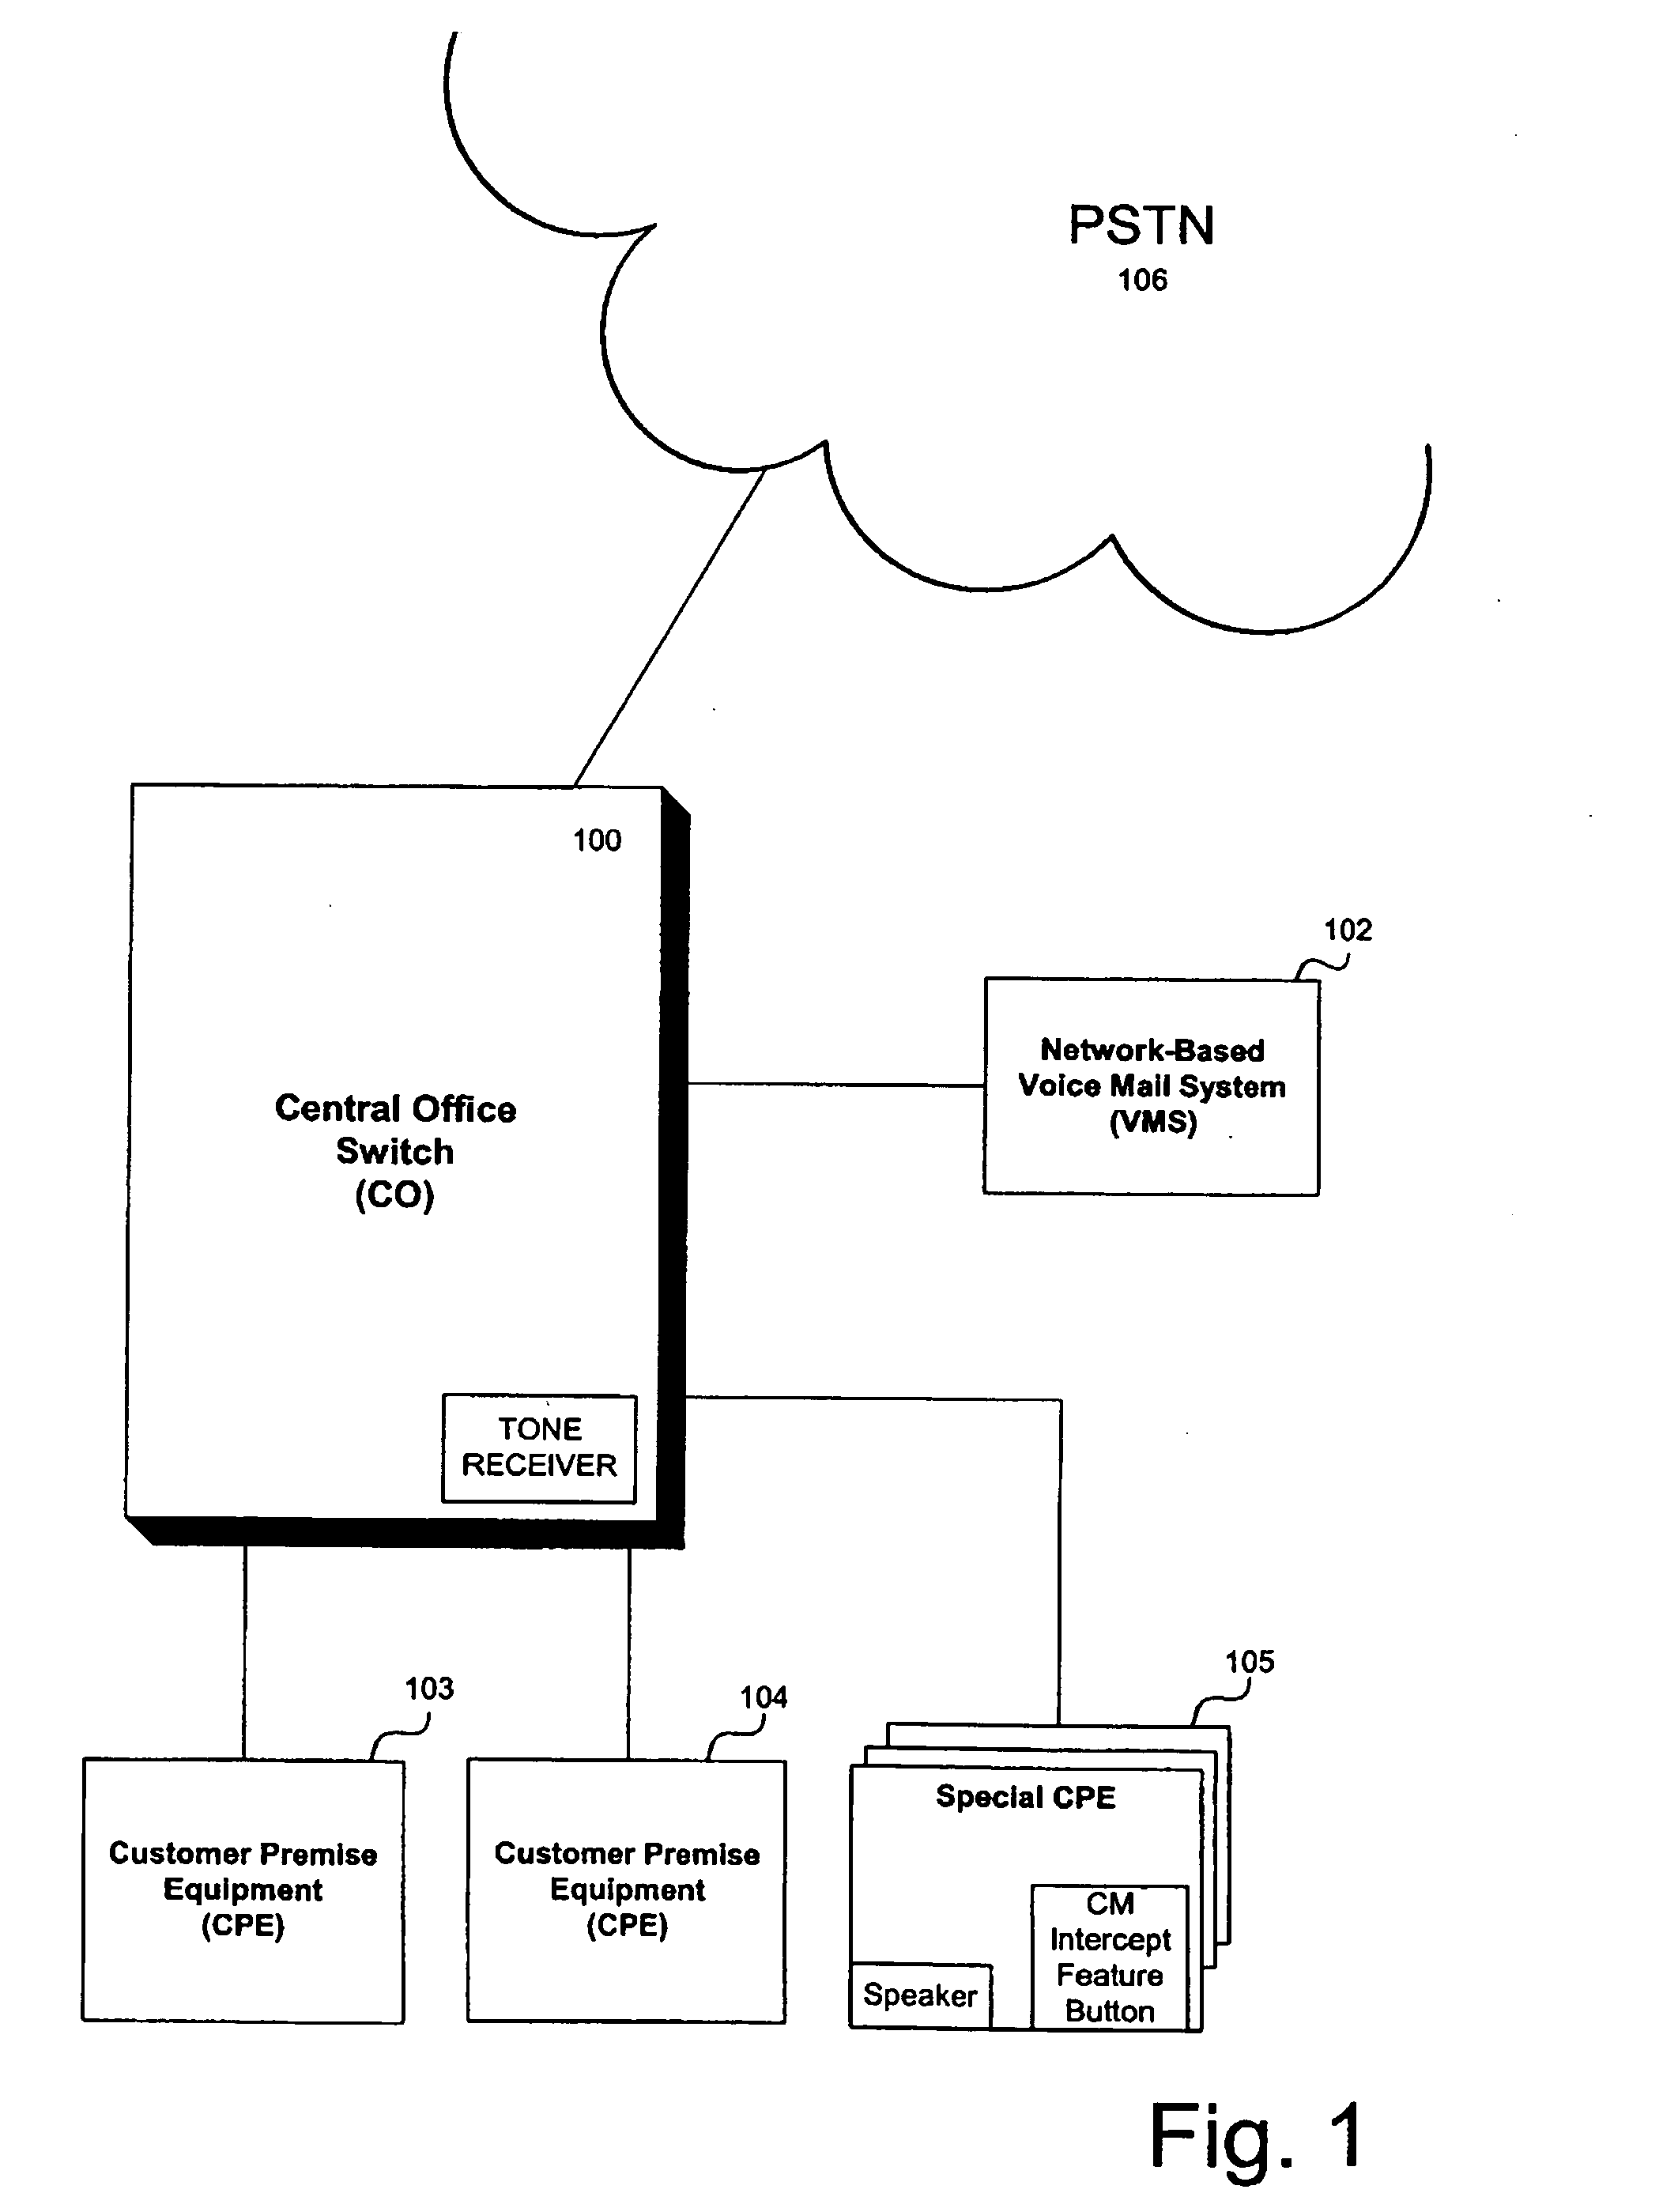 Apparatus, system and method for monitoring a call forwarded to a network-based voice mail system